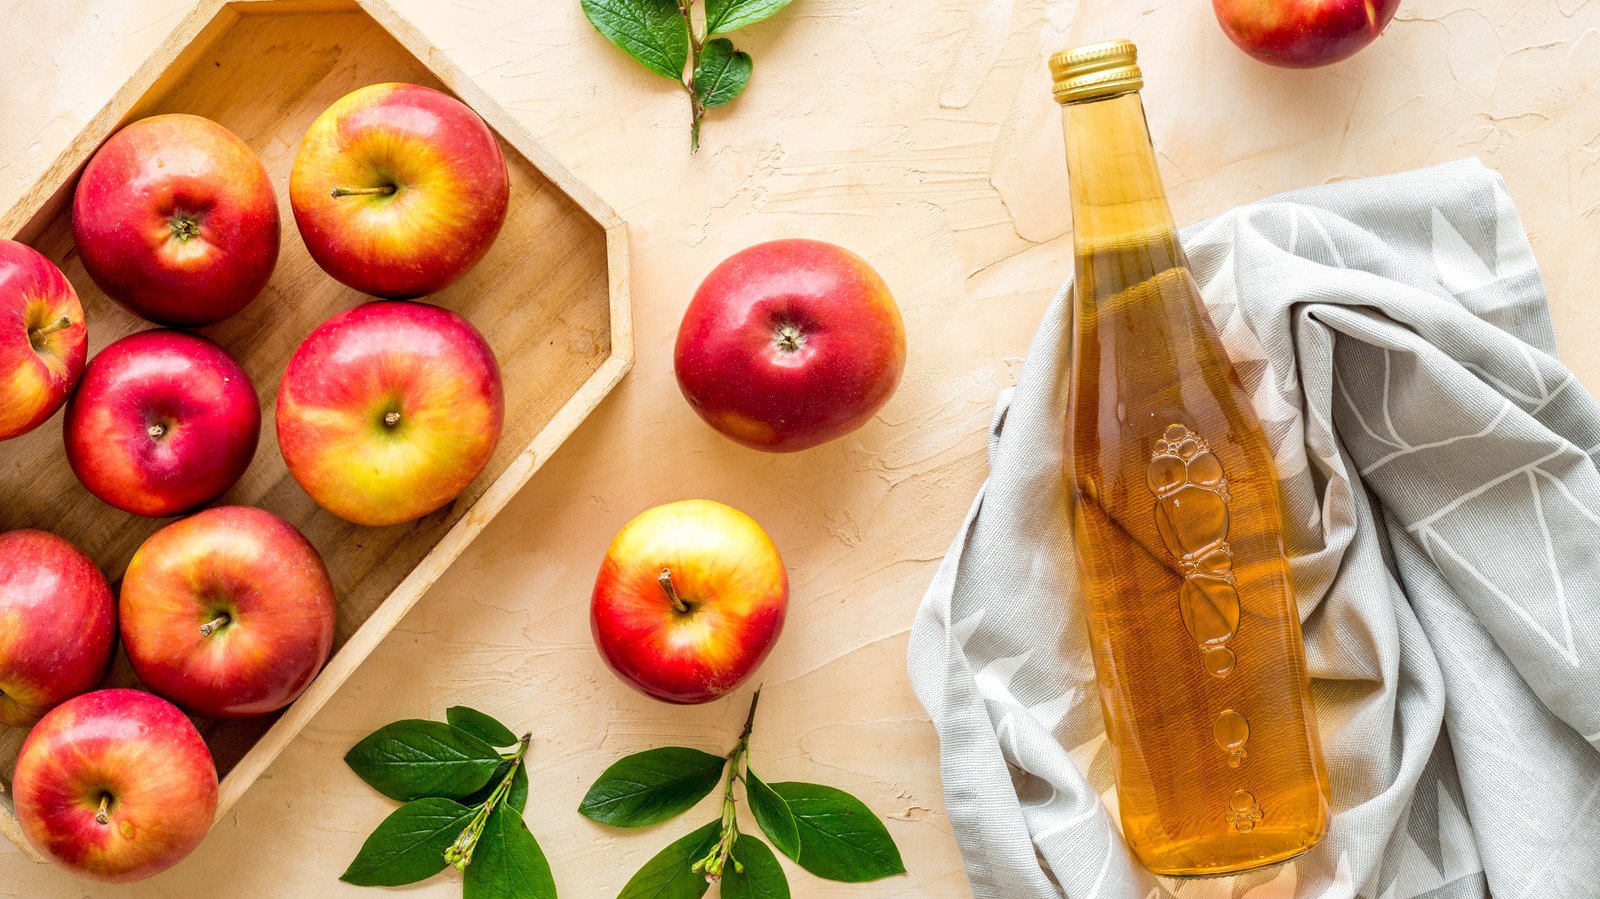 Can Apple Cider Vinegar Actually Help Prevent Cancer?